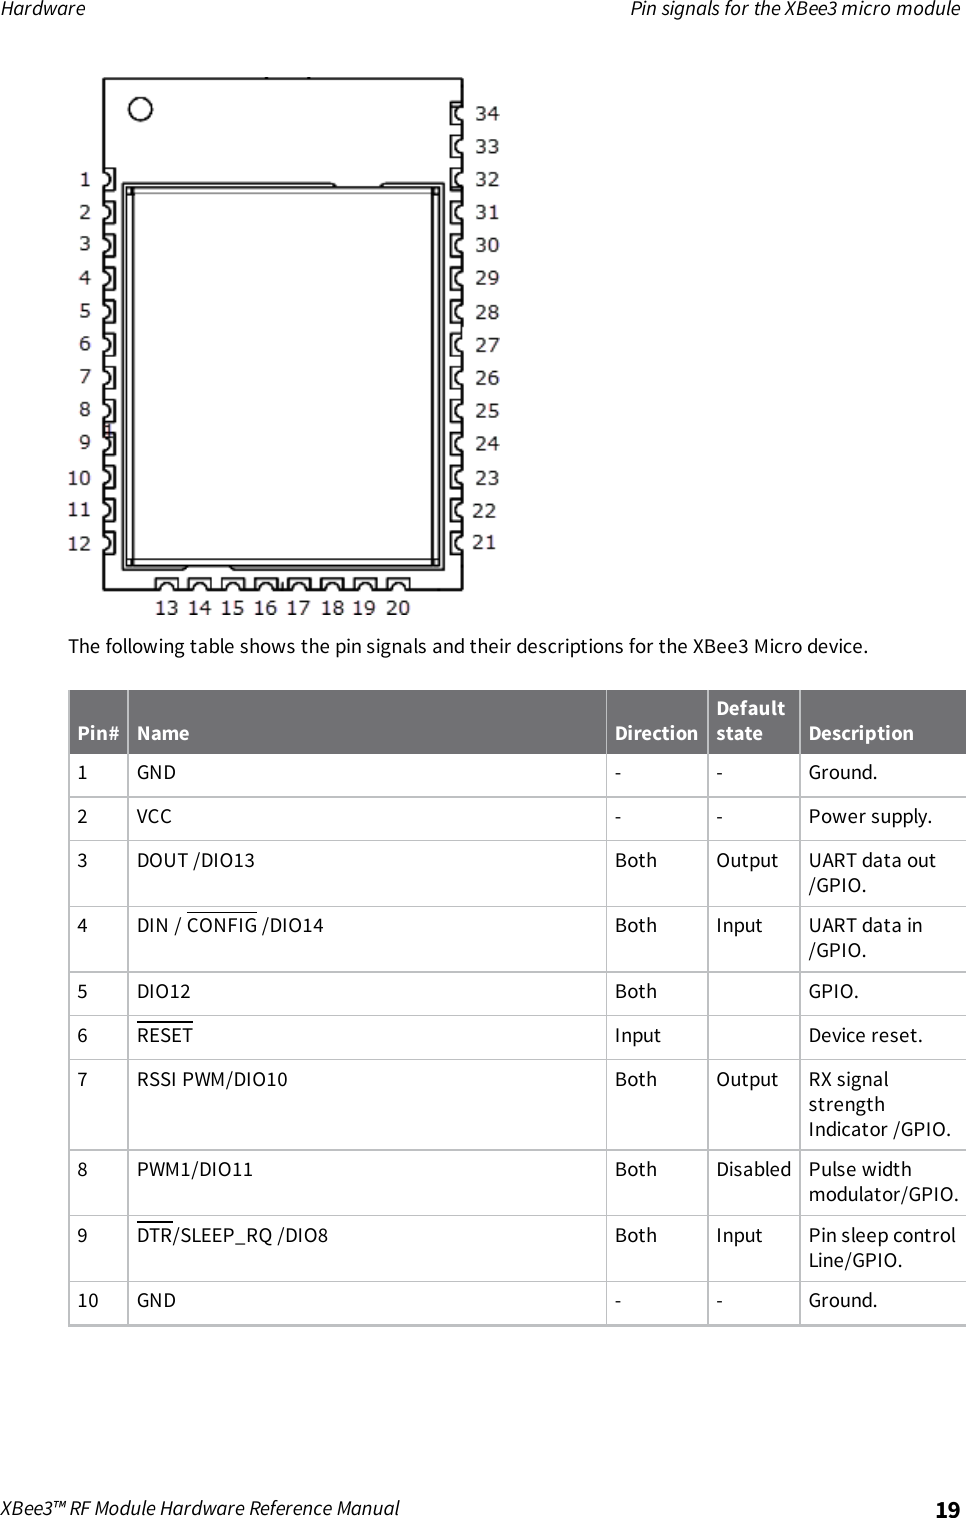 Hardware Pin signals for the XBee3 micro moduleXBee3™ RF Module Hardware Reference Manual 19The following table shows the pin signals and their descriptions for the XBee3 Micro device.Pin# Name DirectionDefaultstate Description1 GND - - Ground.2 VCC - - Power supply.3 DOUT /DIO13 Both Output UART data out/GPIO.4 DIN / CONFIG /DIO14 Both Input UART data in/GPIO.5 DIO12 Both GPIO.6 RESET Input Device reset.7 RSSI PWM/DIO10 Both Output RX signalstrengthIndicator /GPIO.8 PWM1/DIO11 Both Disabled Pulse widthmodulator/GPIO.9 DTR/SLEEP_RQ /DIO8 Both Input Pin sleep controlLine/GPIO.10 GND - - Ground.